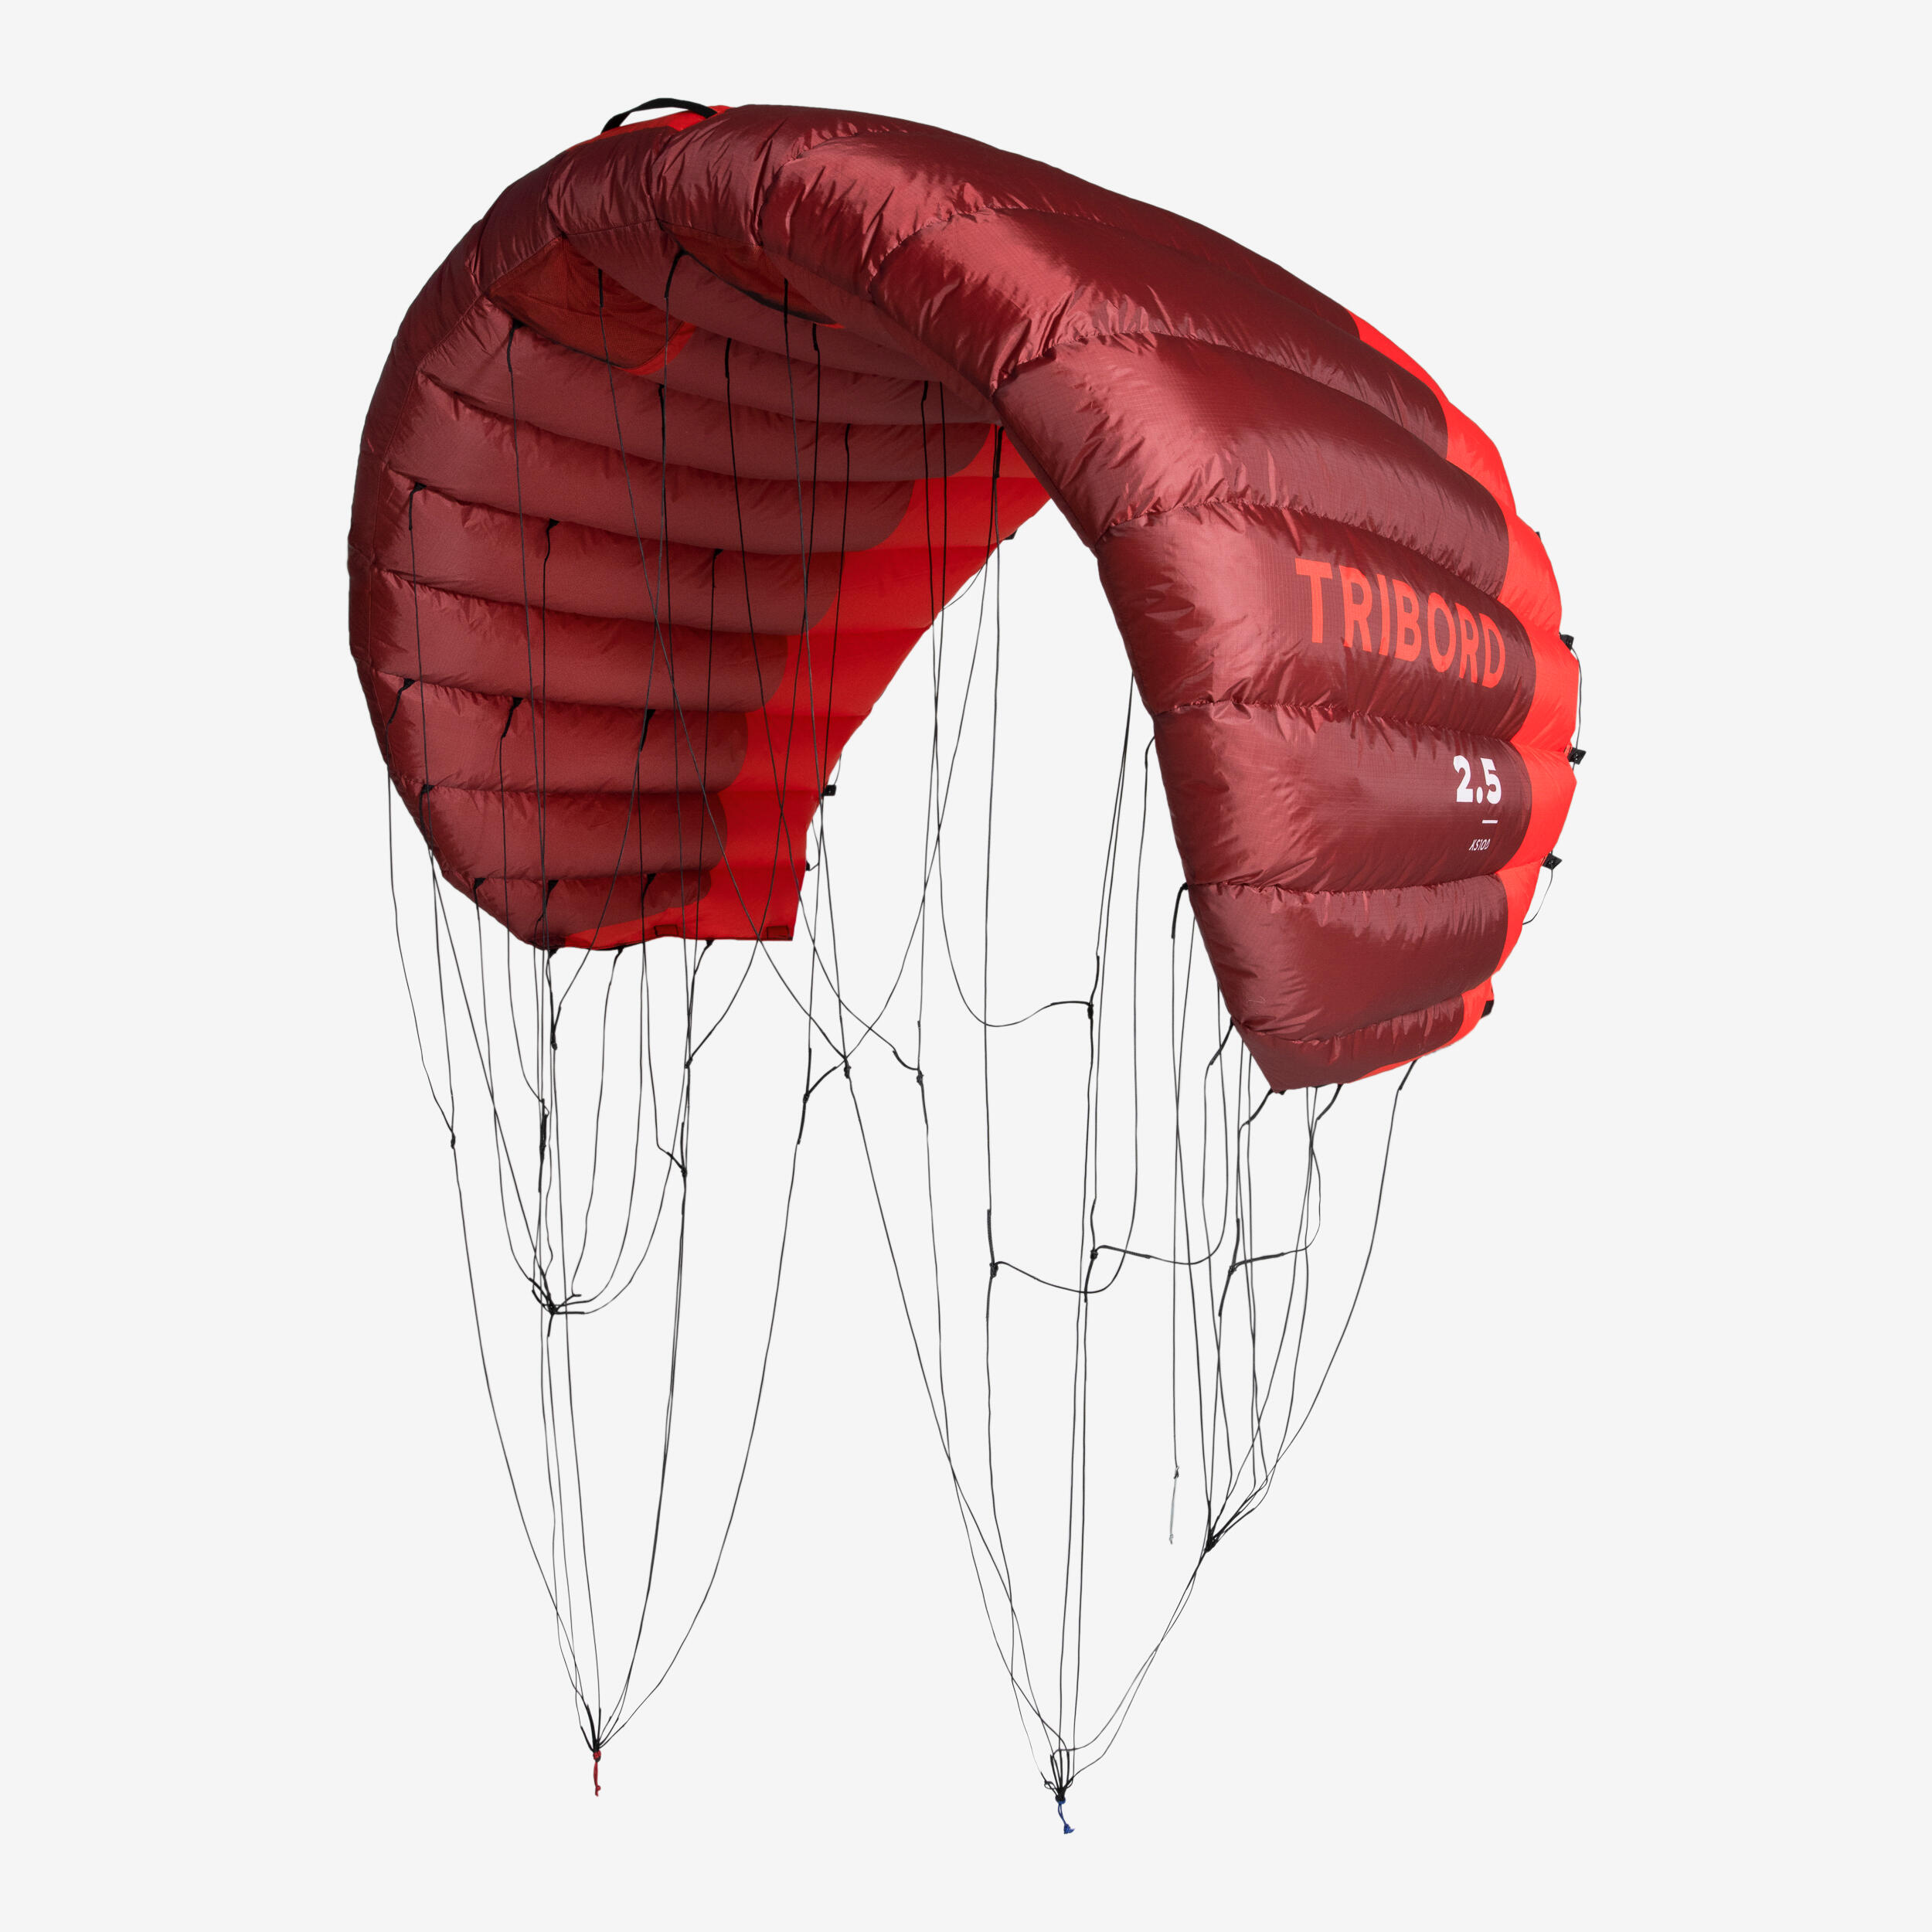 TRACTION KITE KS100 2.5 m2 red - with bar 2/7